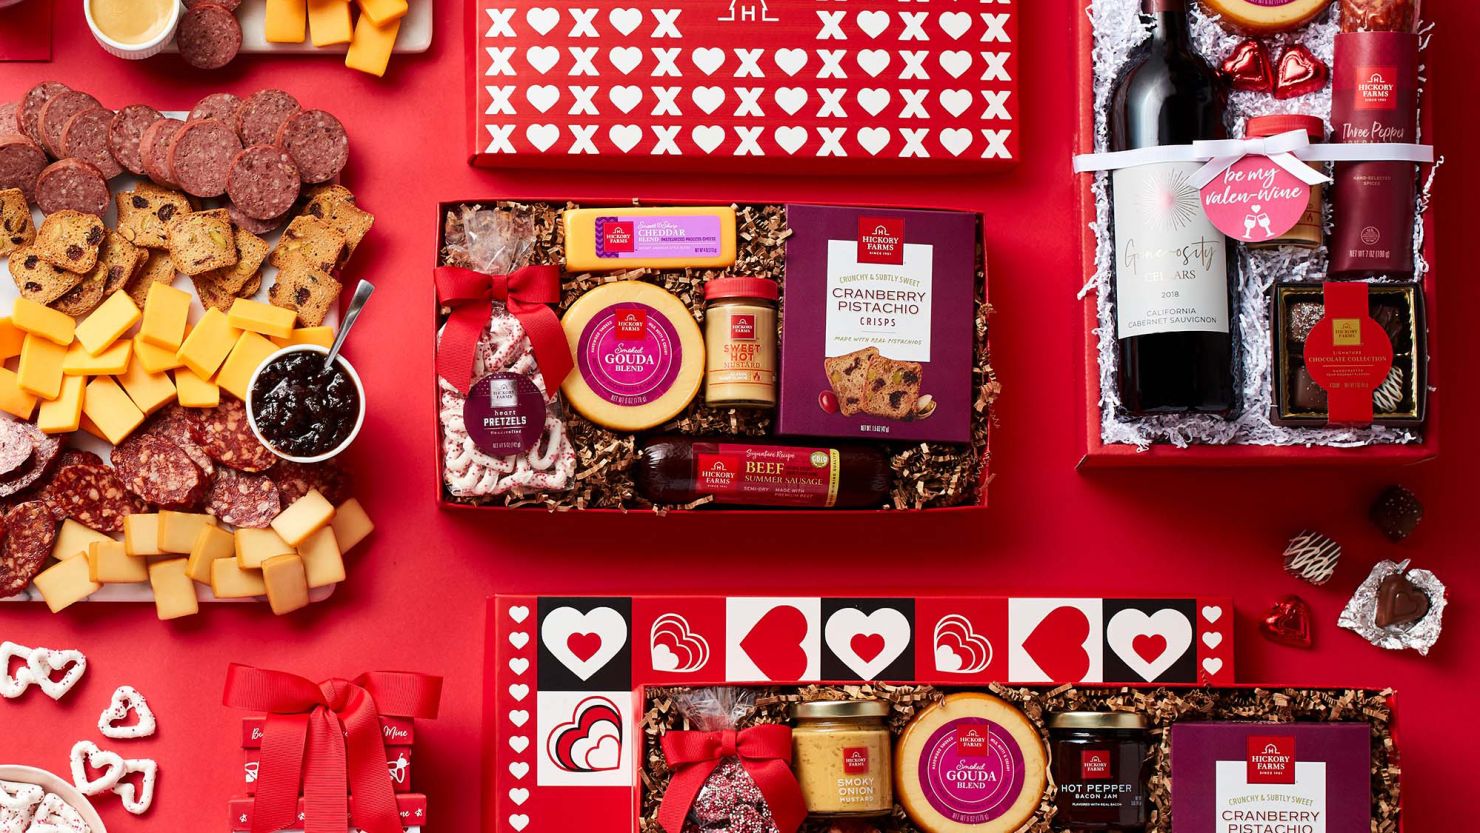 Valentine's Day Gifts: The Best Gifts To Buy Before February 14